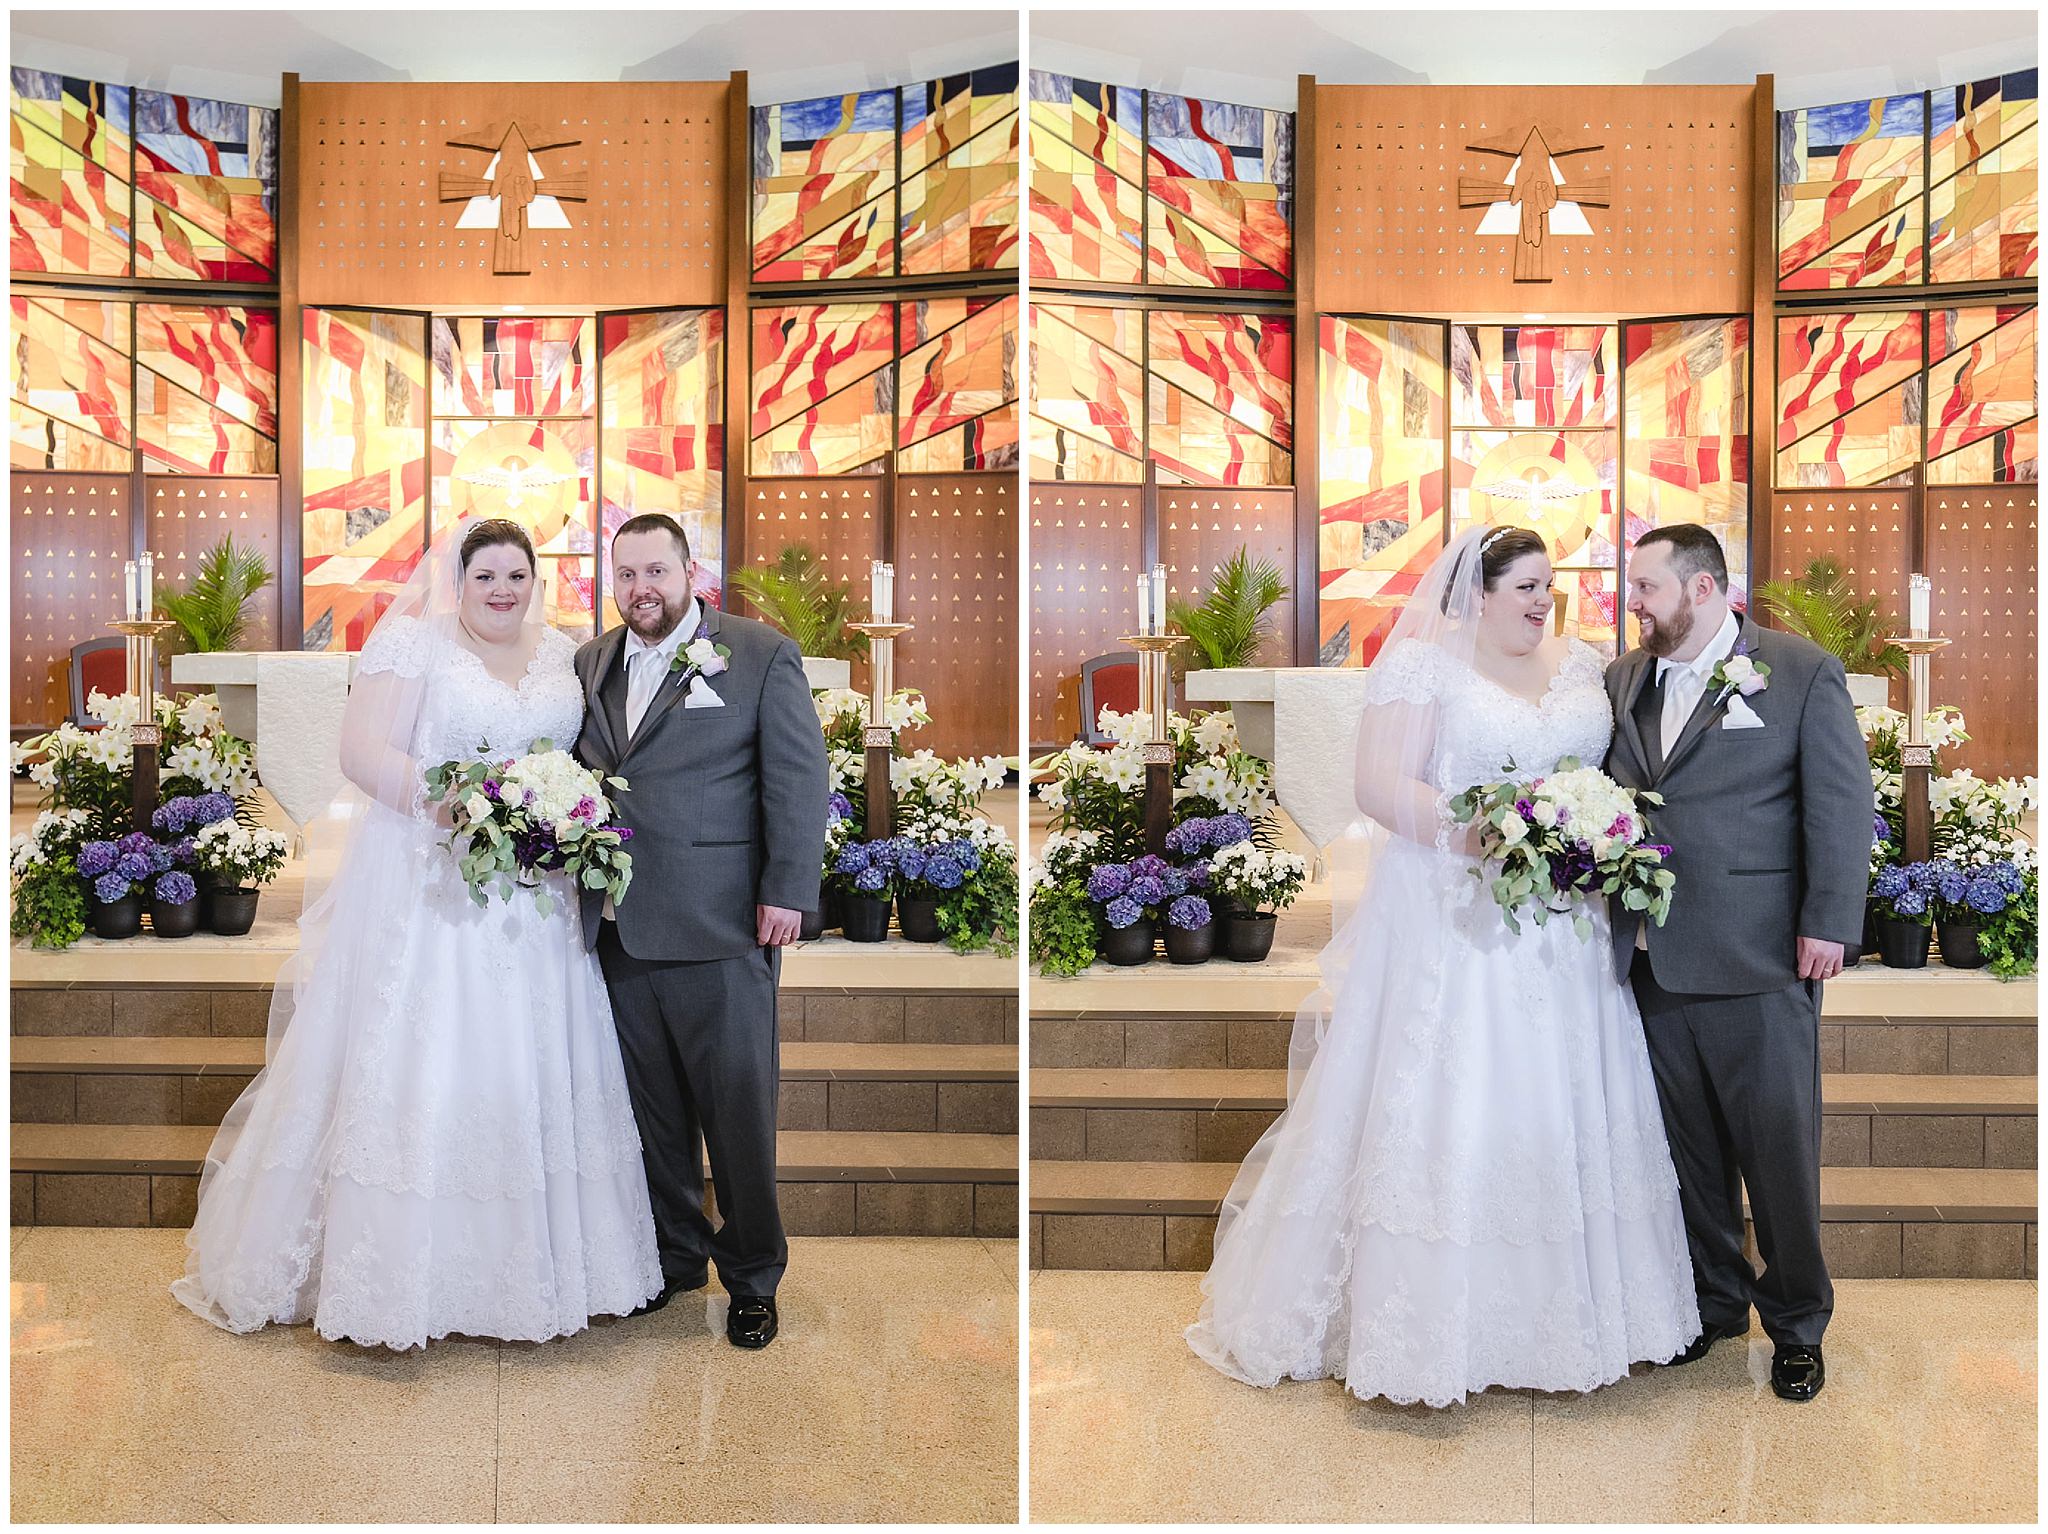 Newlyweds at the altar of Holy Trinity Church in Robinson Township